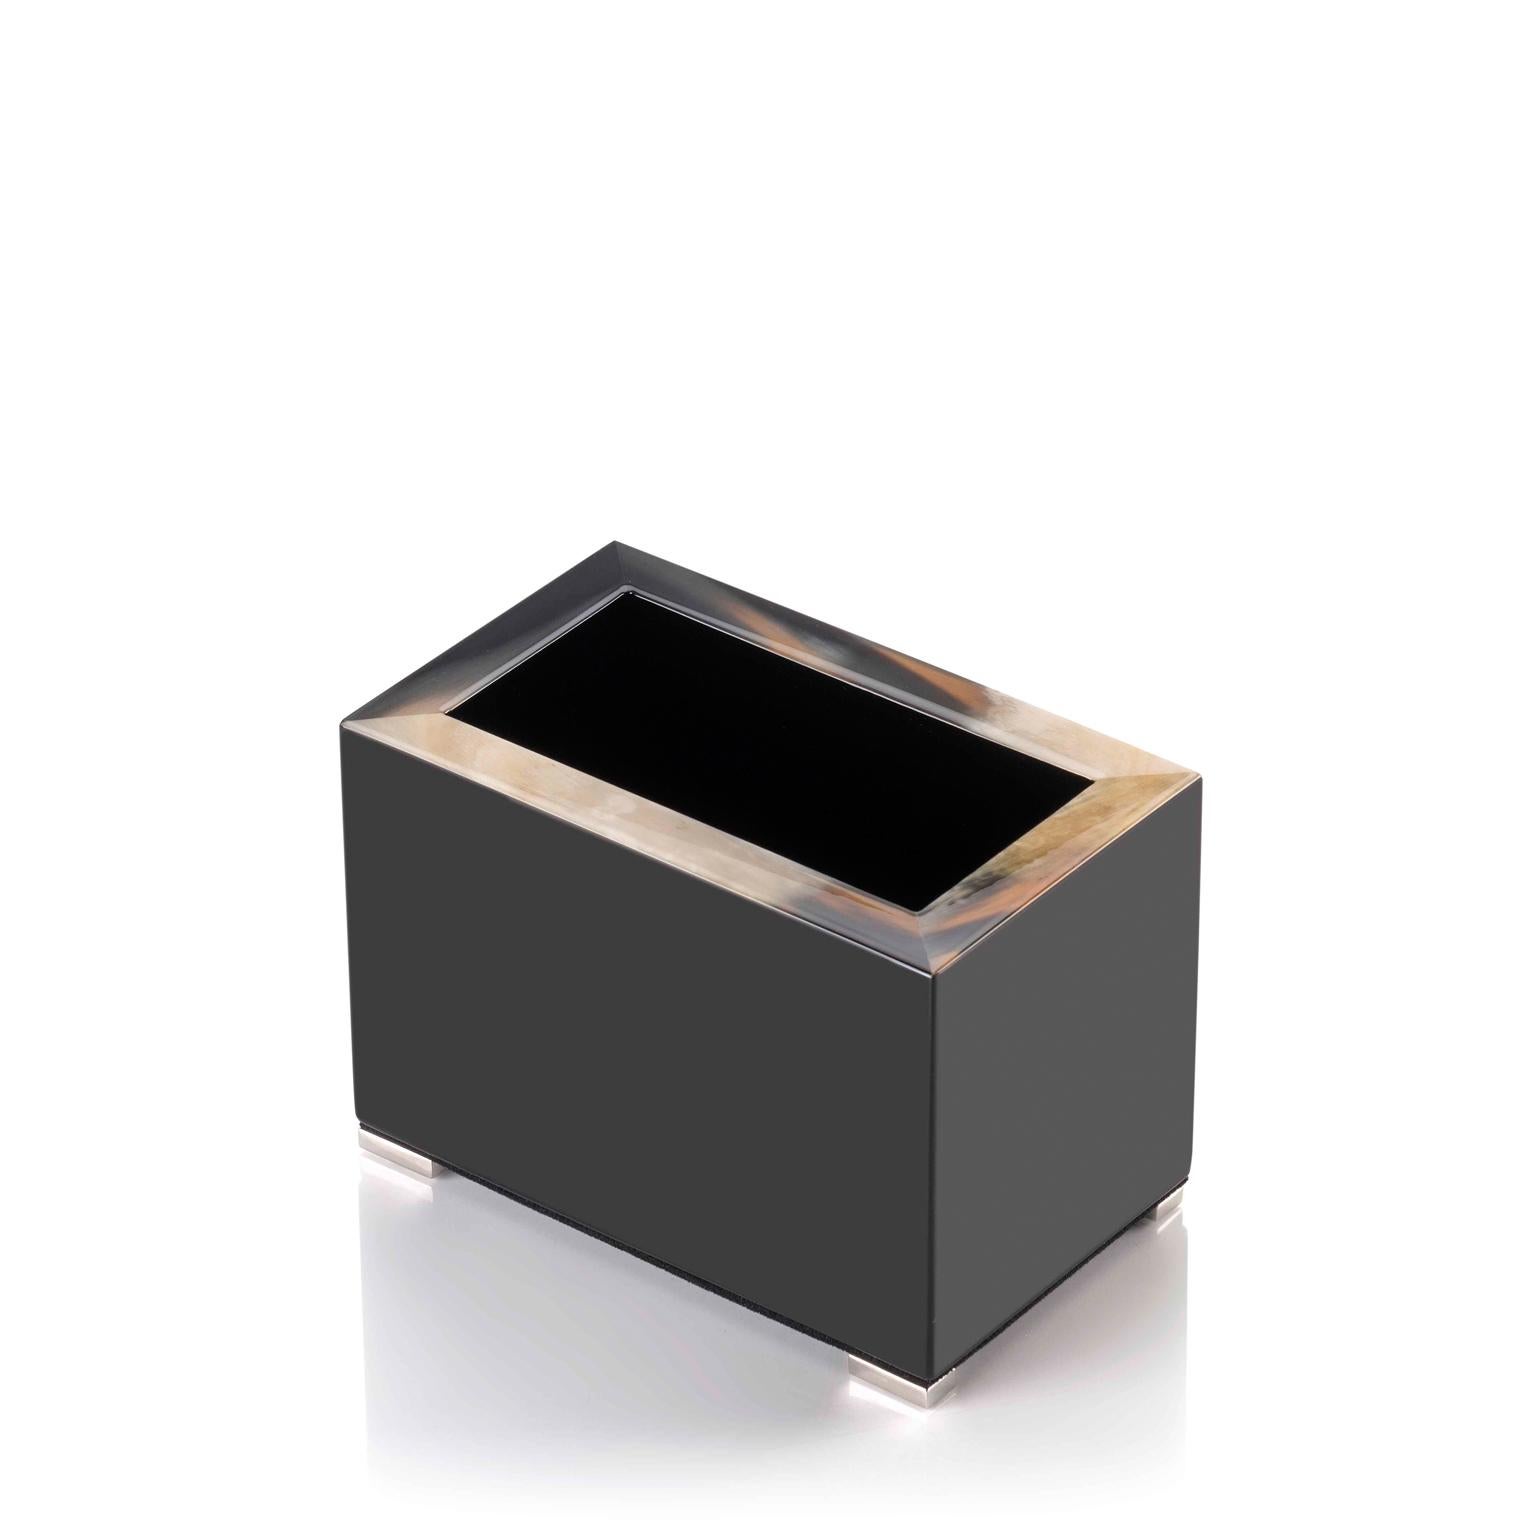 An elegant addition to an executive desk, our Calipso pen holder showcases a rectangular silhouette in glossy black lacquered wood, accented with a distinctive rim in Corno Italiano, whose unique veining provide a striking visual impact. The design